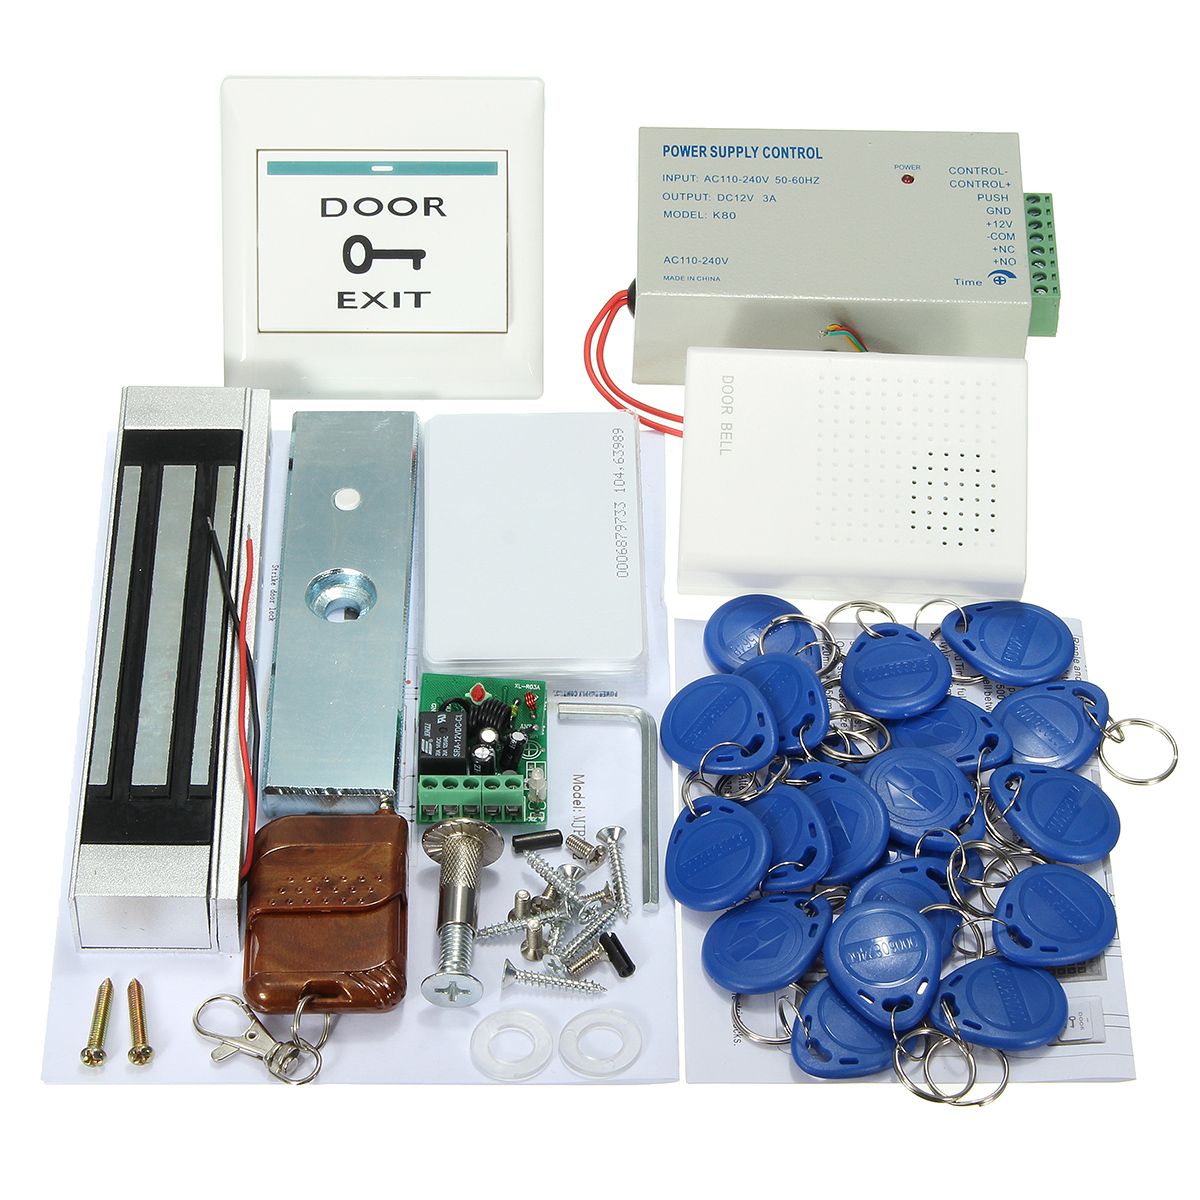 MJPT02-Entry-Strike-Door-Lock-Access-Control-System-Bell-20-ID-Card-Remote-Home-Office-1126971